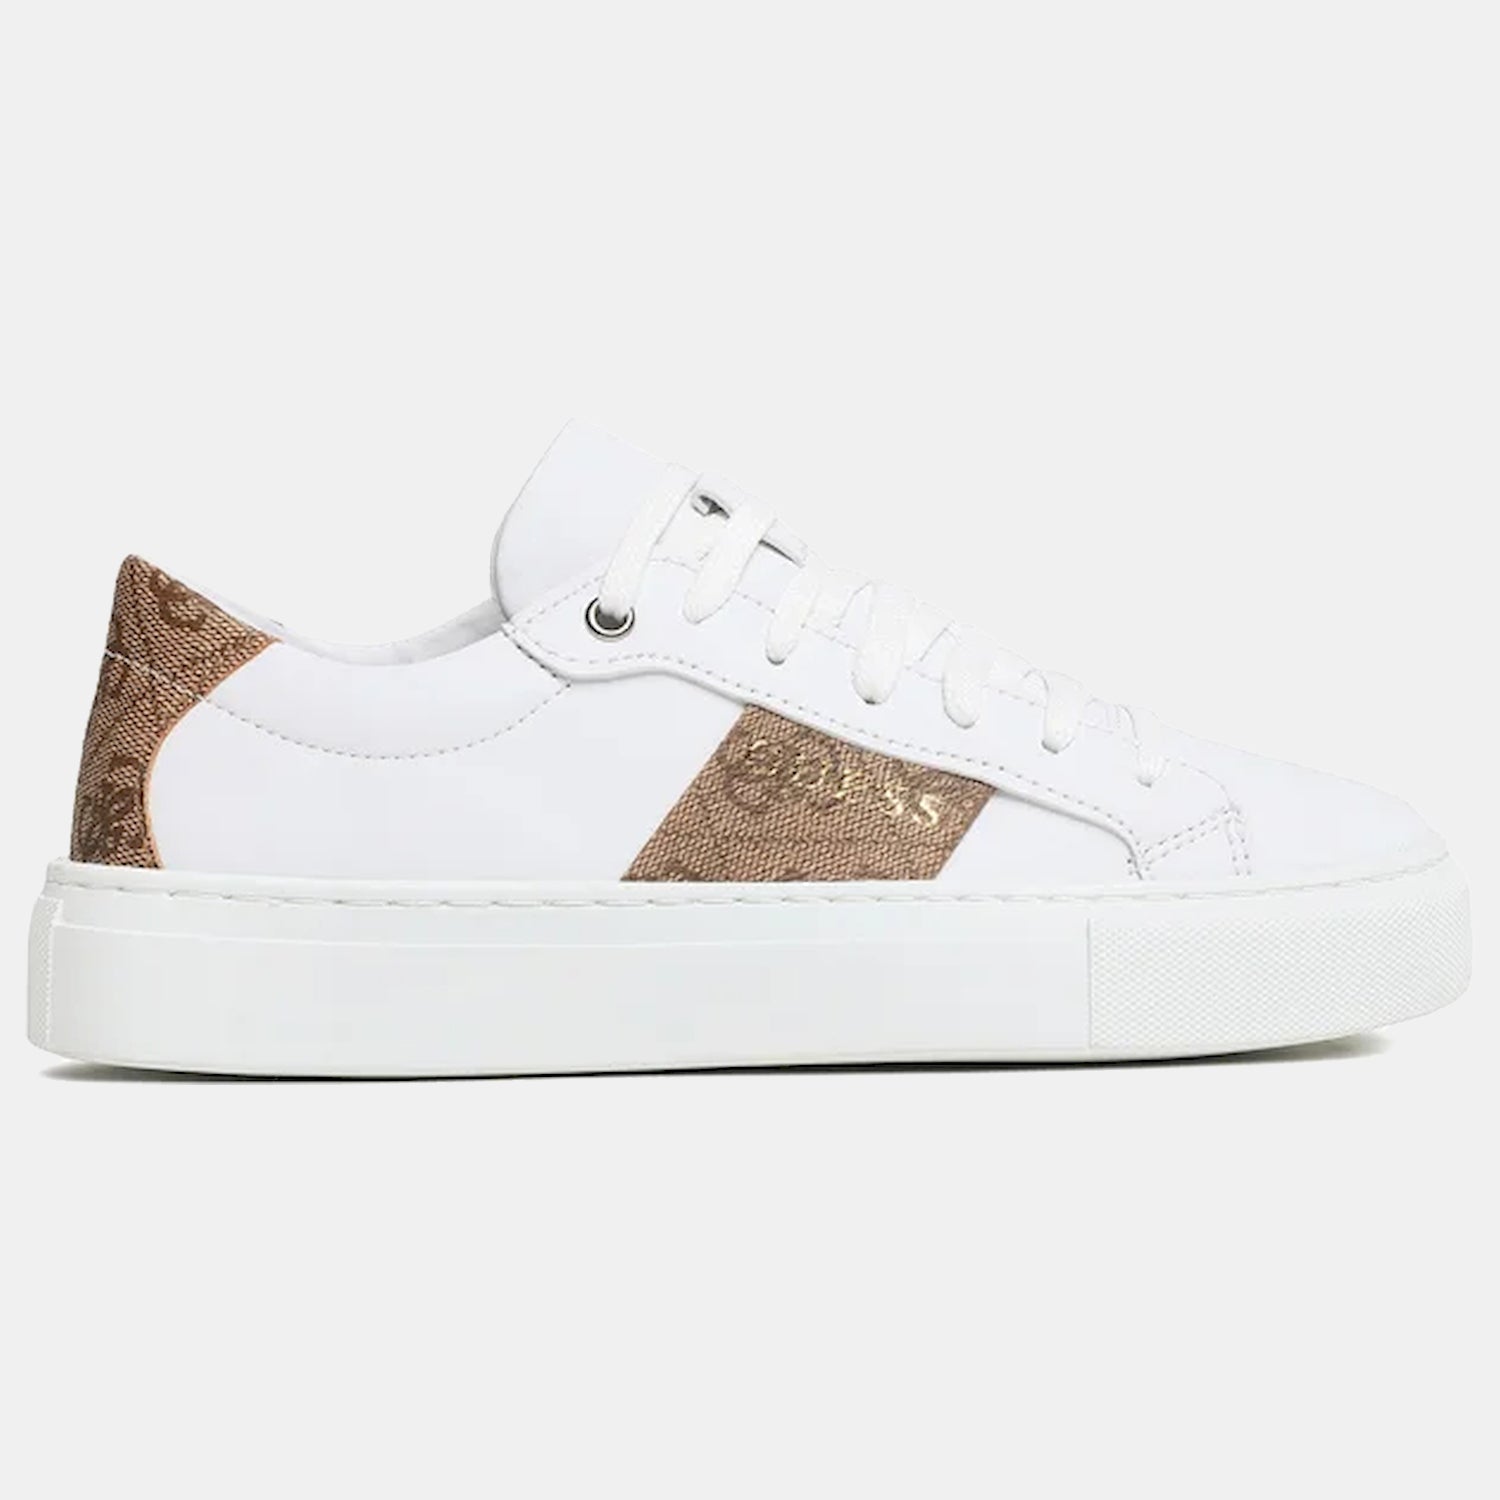 Guess Sapatilhas Sneakers Shoes Fl6tod Whi Brown Branco Castanho_shot1